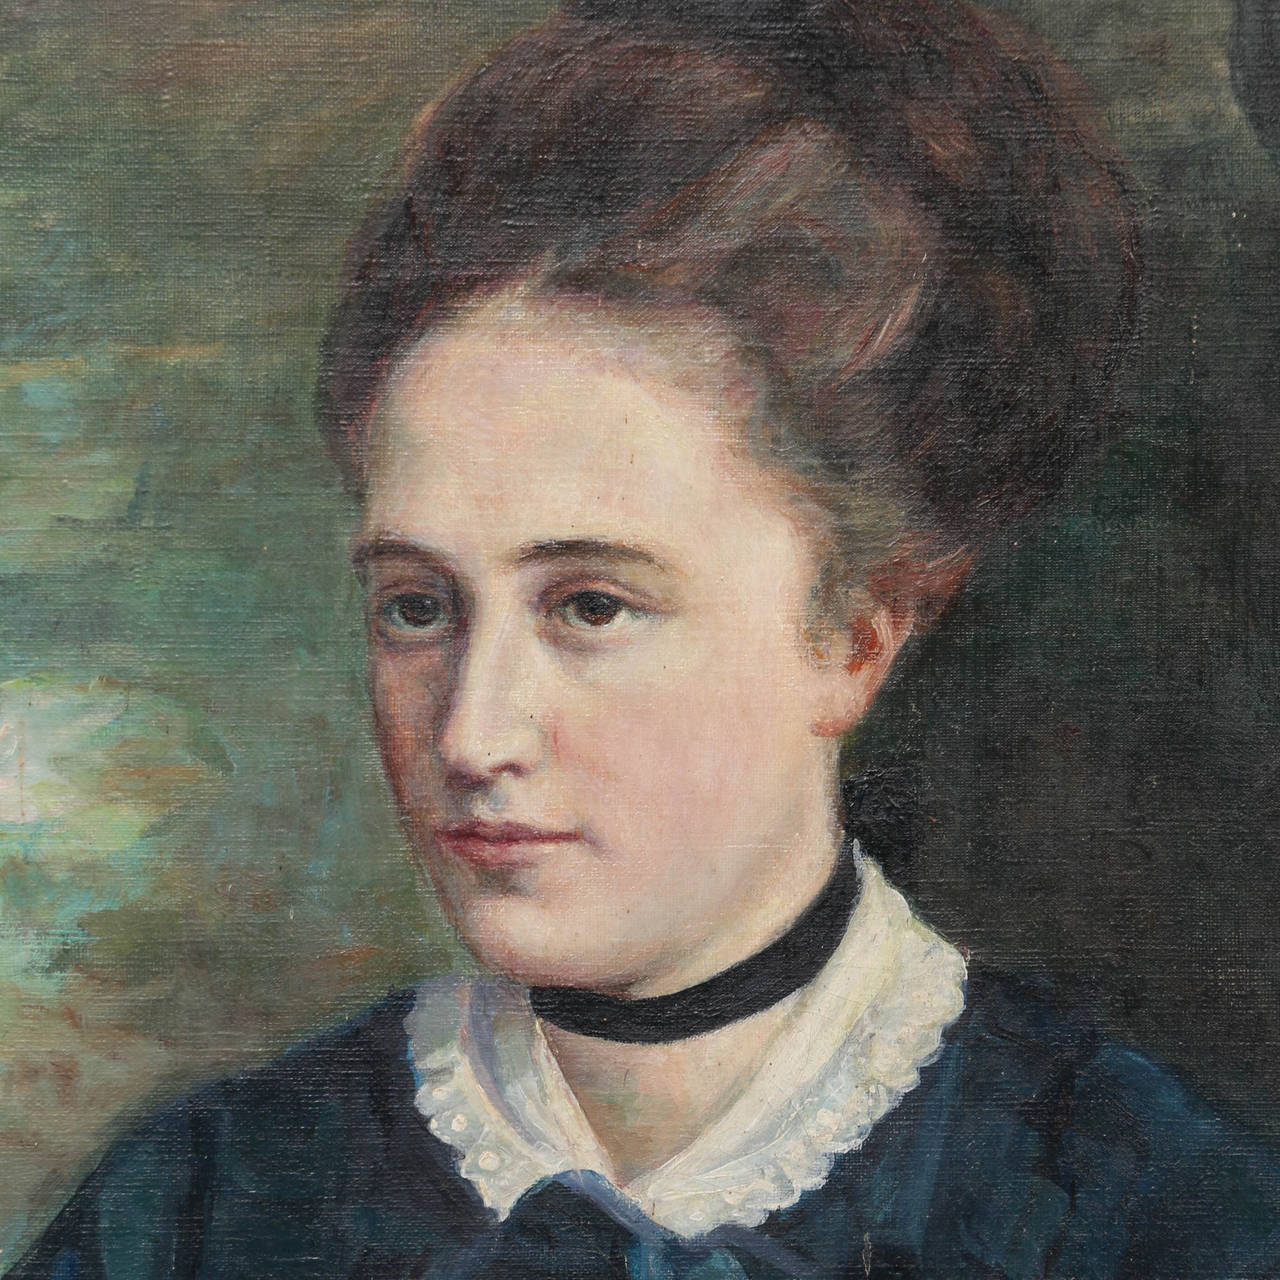 Original oil on canvas portrait of young woman with brunette hair pulled up and wearing a black fabric choker and black dress with white collar. Indistinctly signed.